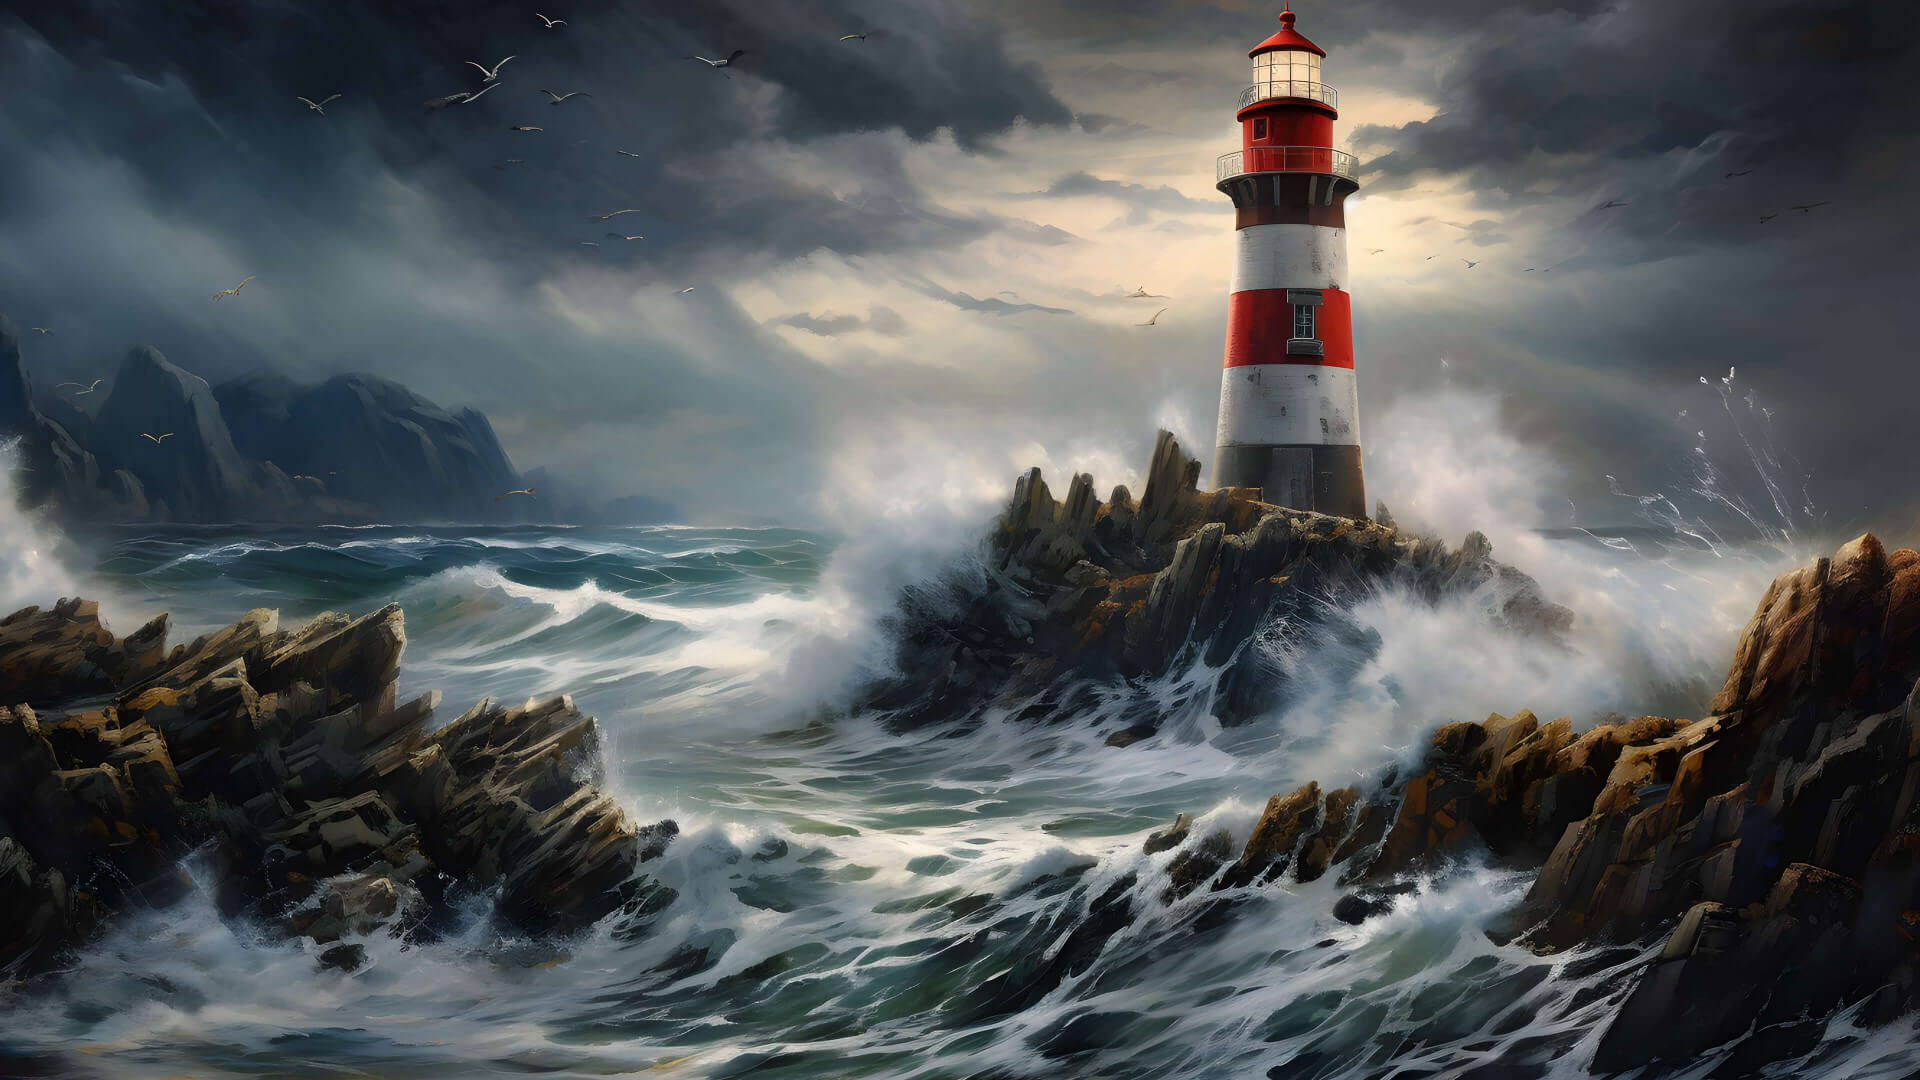 Lighthouse in the ocean waves wallpaper 1280x720